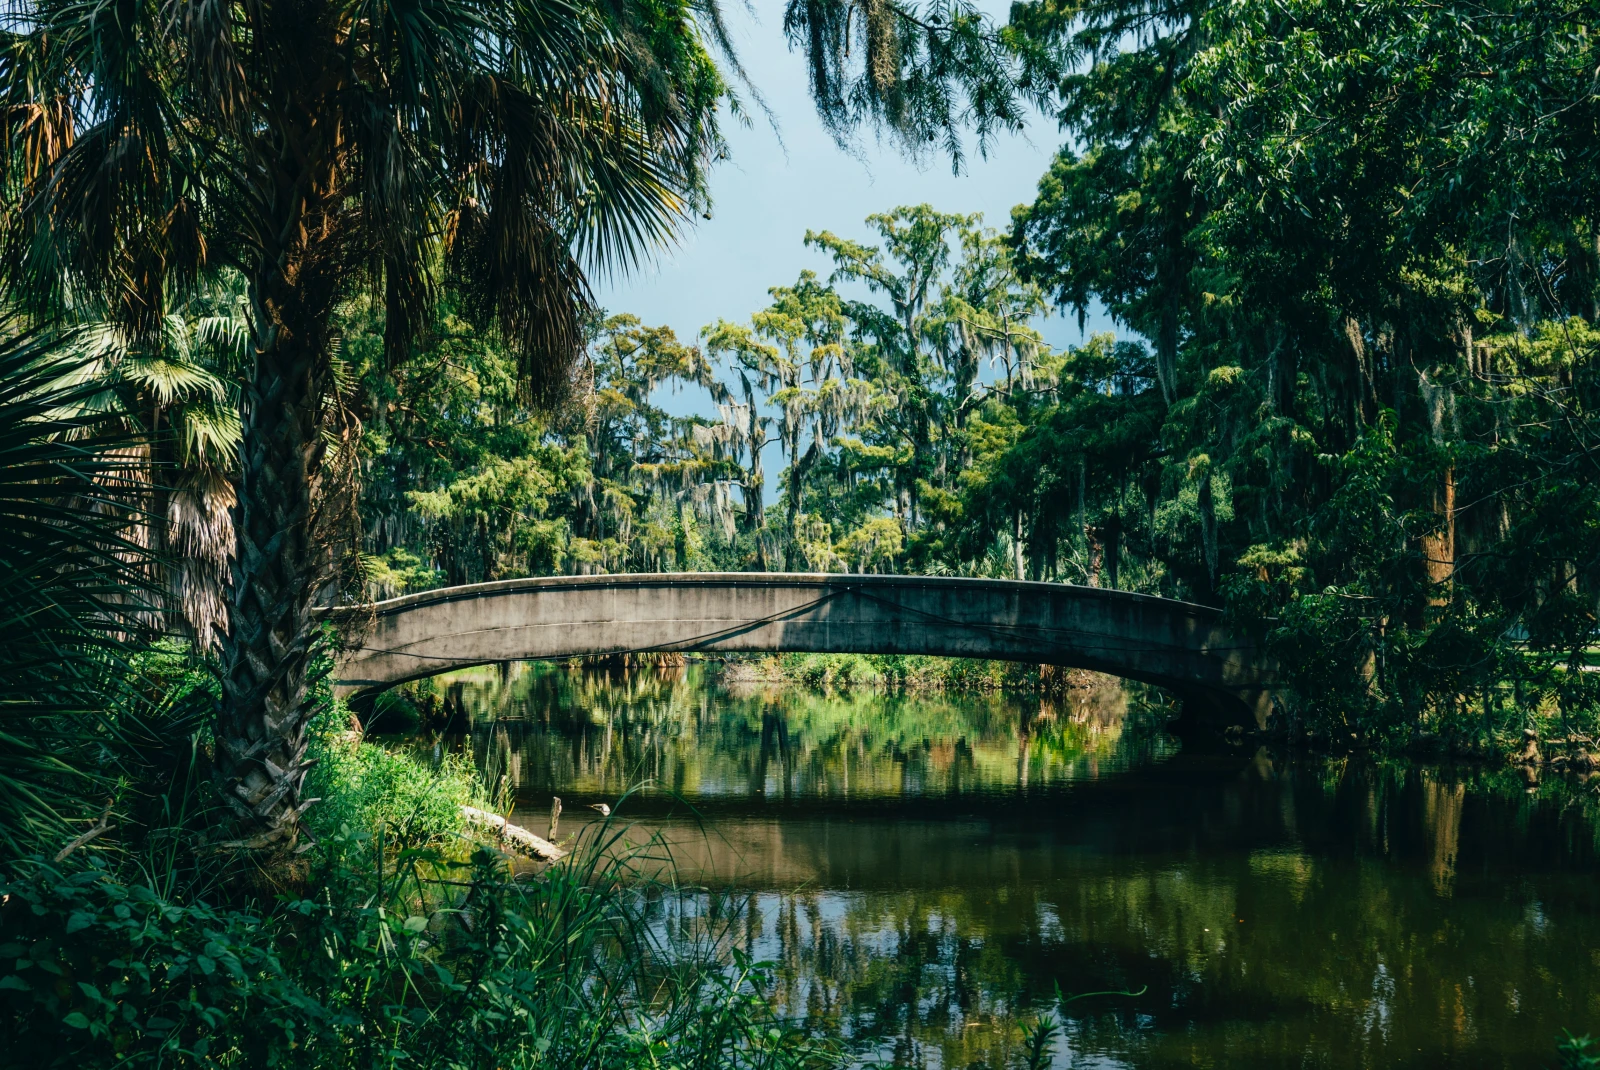 bridge over water surrounded by green plants